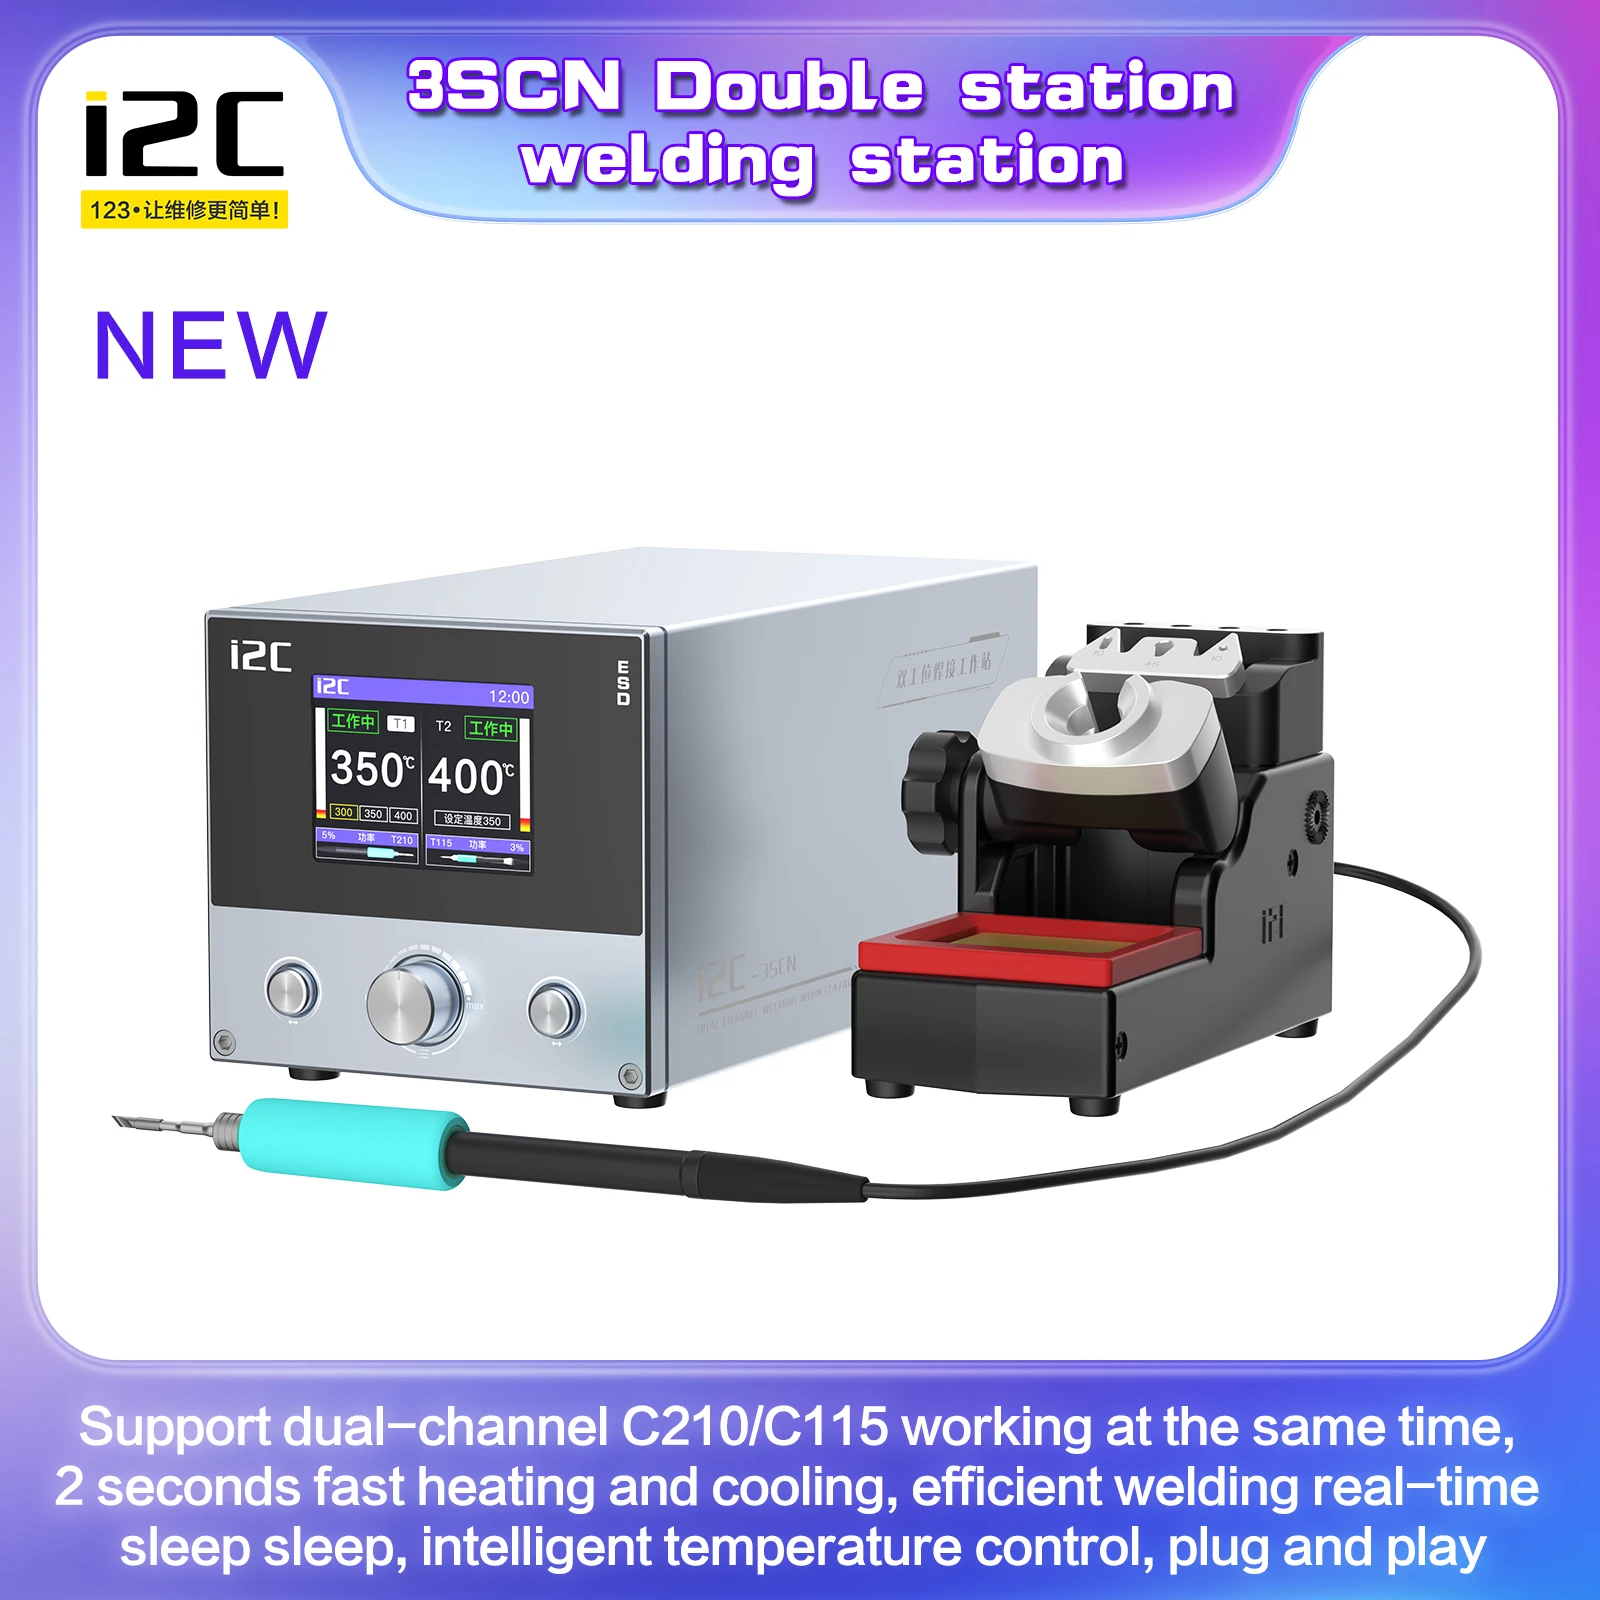 

i2C 3SCN Soldering Station JBC C115 C210 Double Station Welding Rework Station For Cell-Phone PCB IC Repair Solder Tools